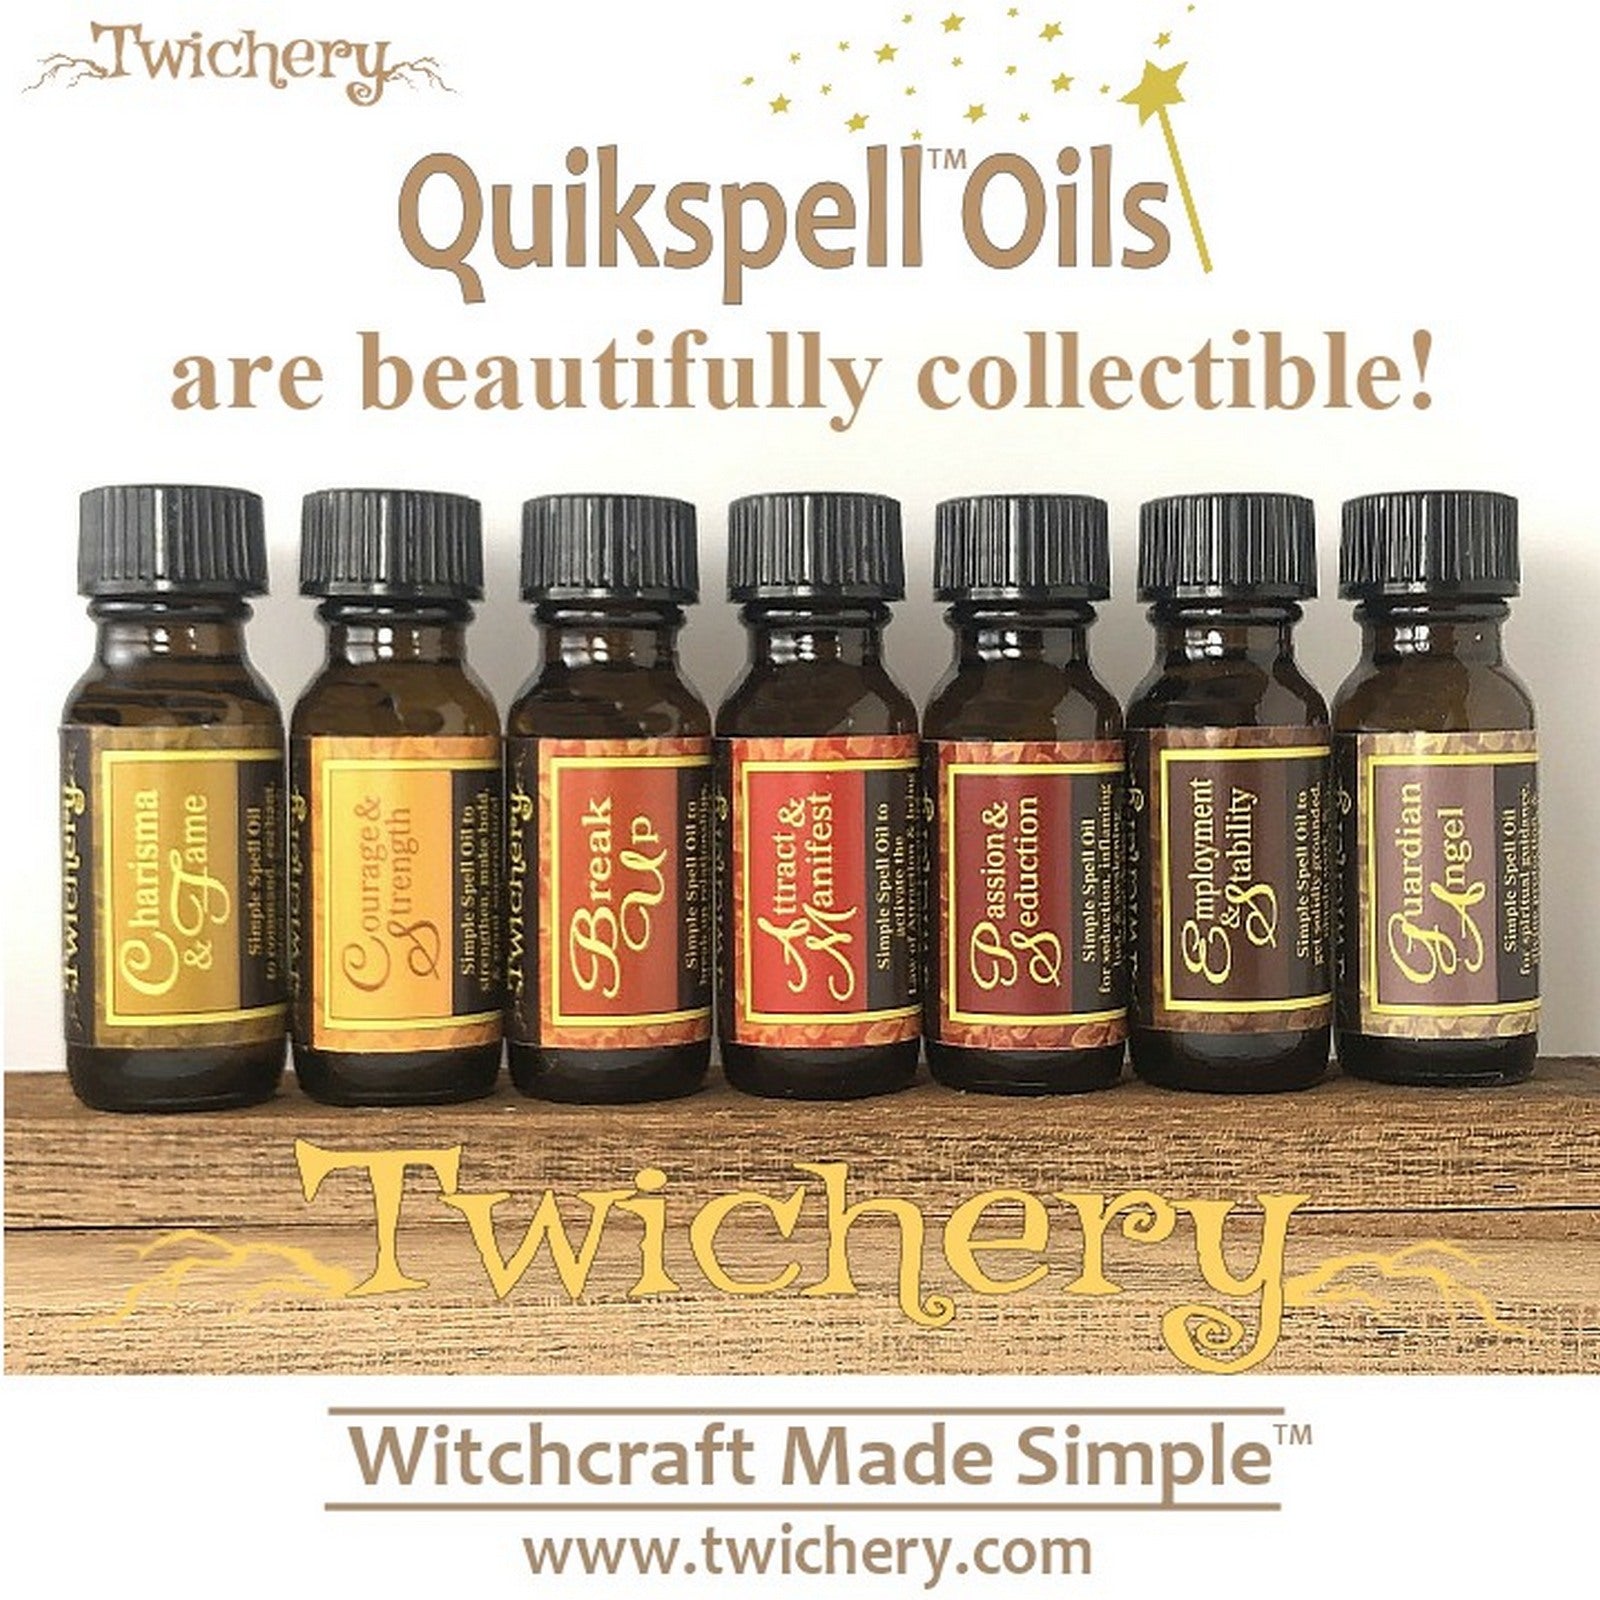 Collect all 24 Twichery Quikspell Oils for all your magickal needs, including our Quikspell Psychic Enhancement Blend! Hoodoo, Voodoo, Wicca, Witchcraft Made Simple